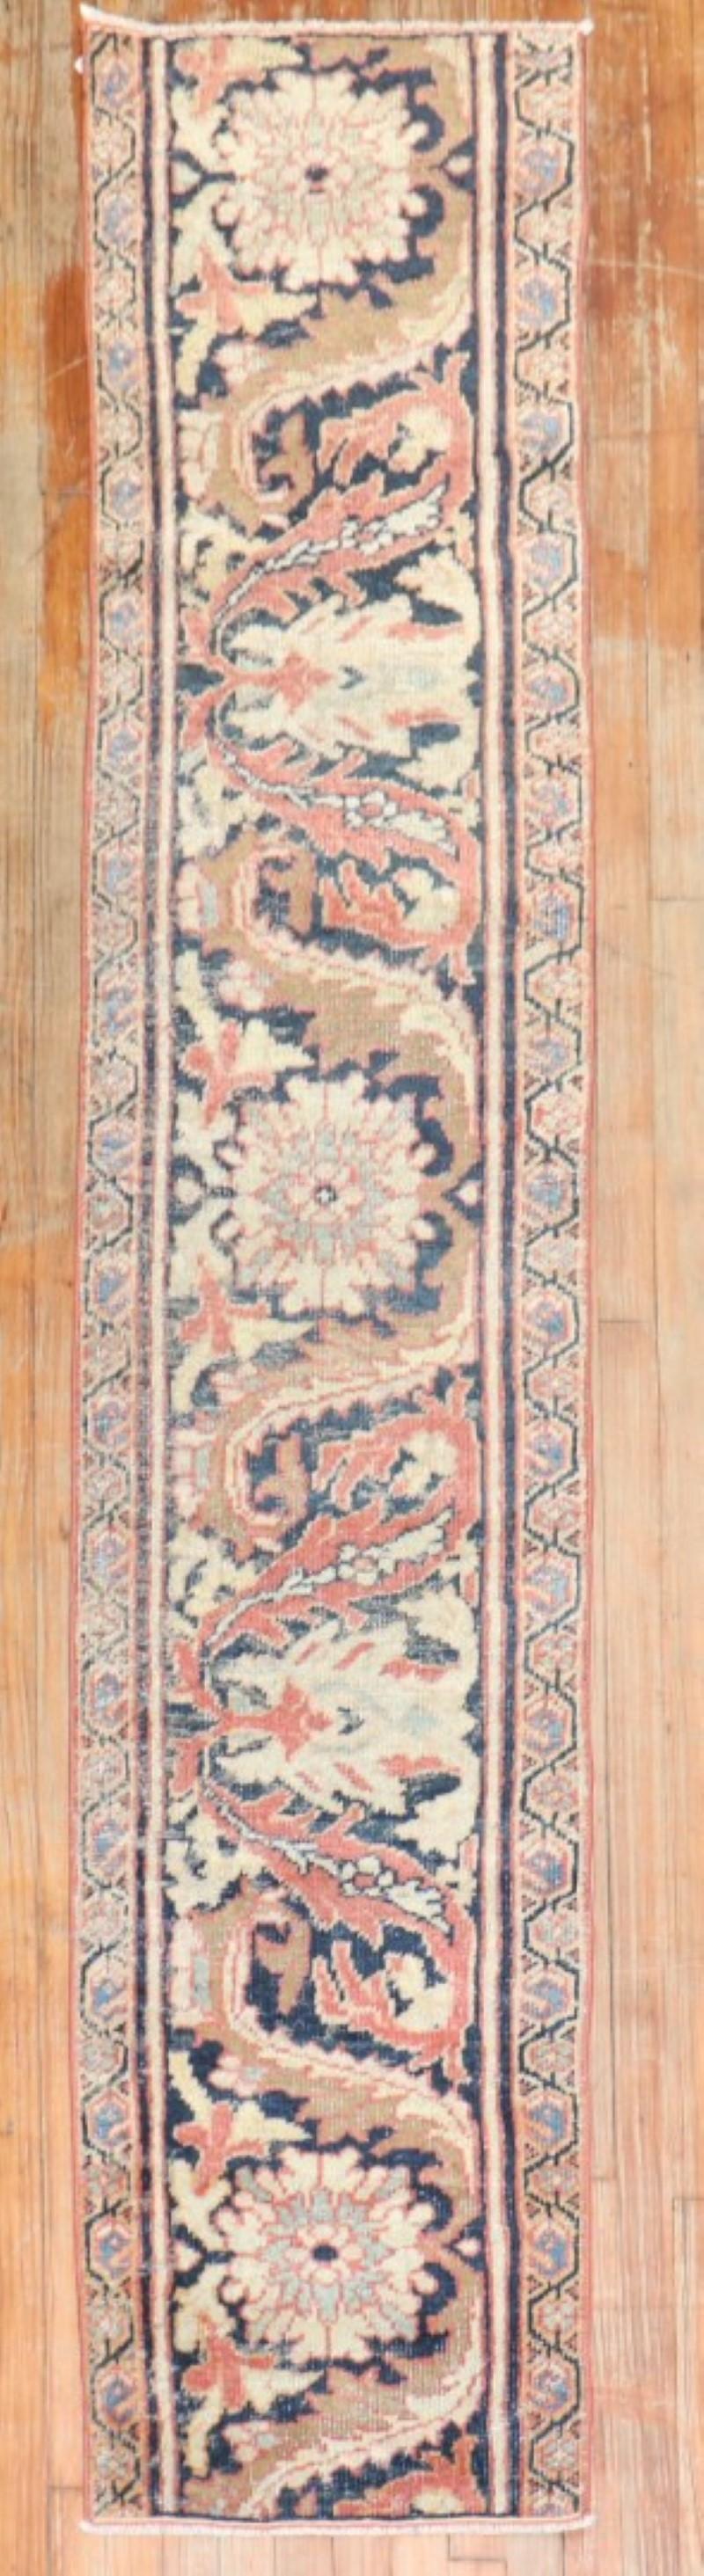 A Persian Mahal fragment Border runner from the late 19th century.

Measures: 1'9'' x 8'6''

Mahal Persian carpets from the 19th century and turn of the 20th century have become one of the most desirable among Persian village weaving's, as they